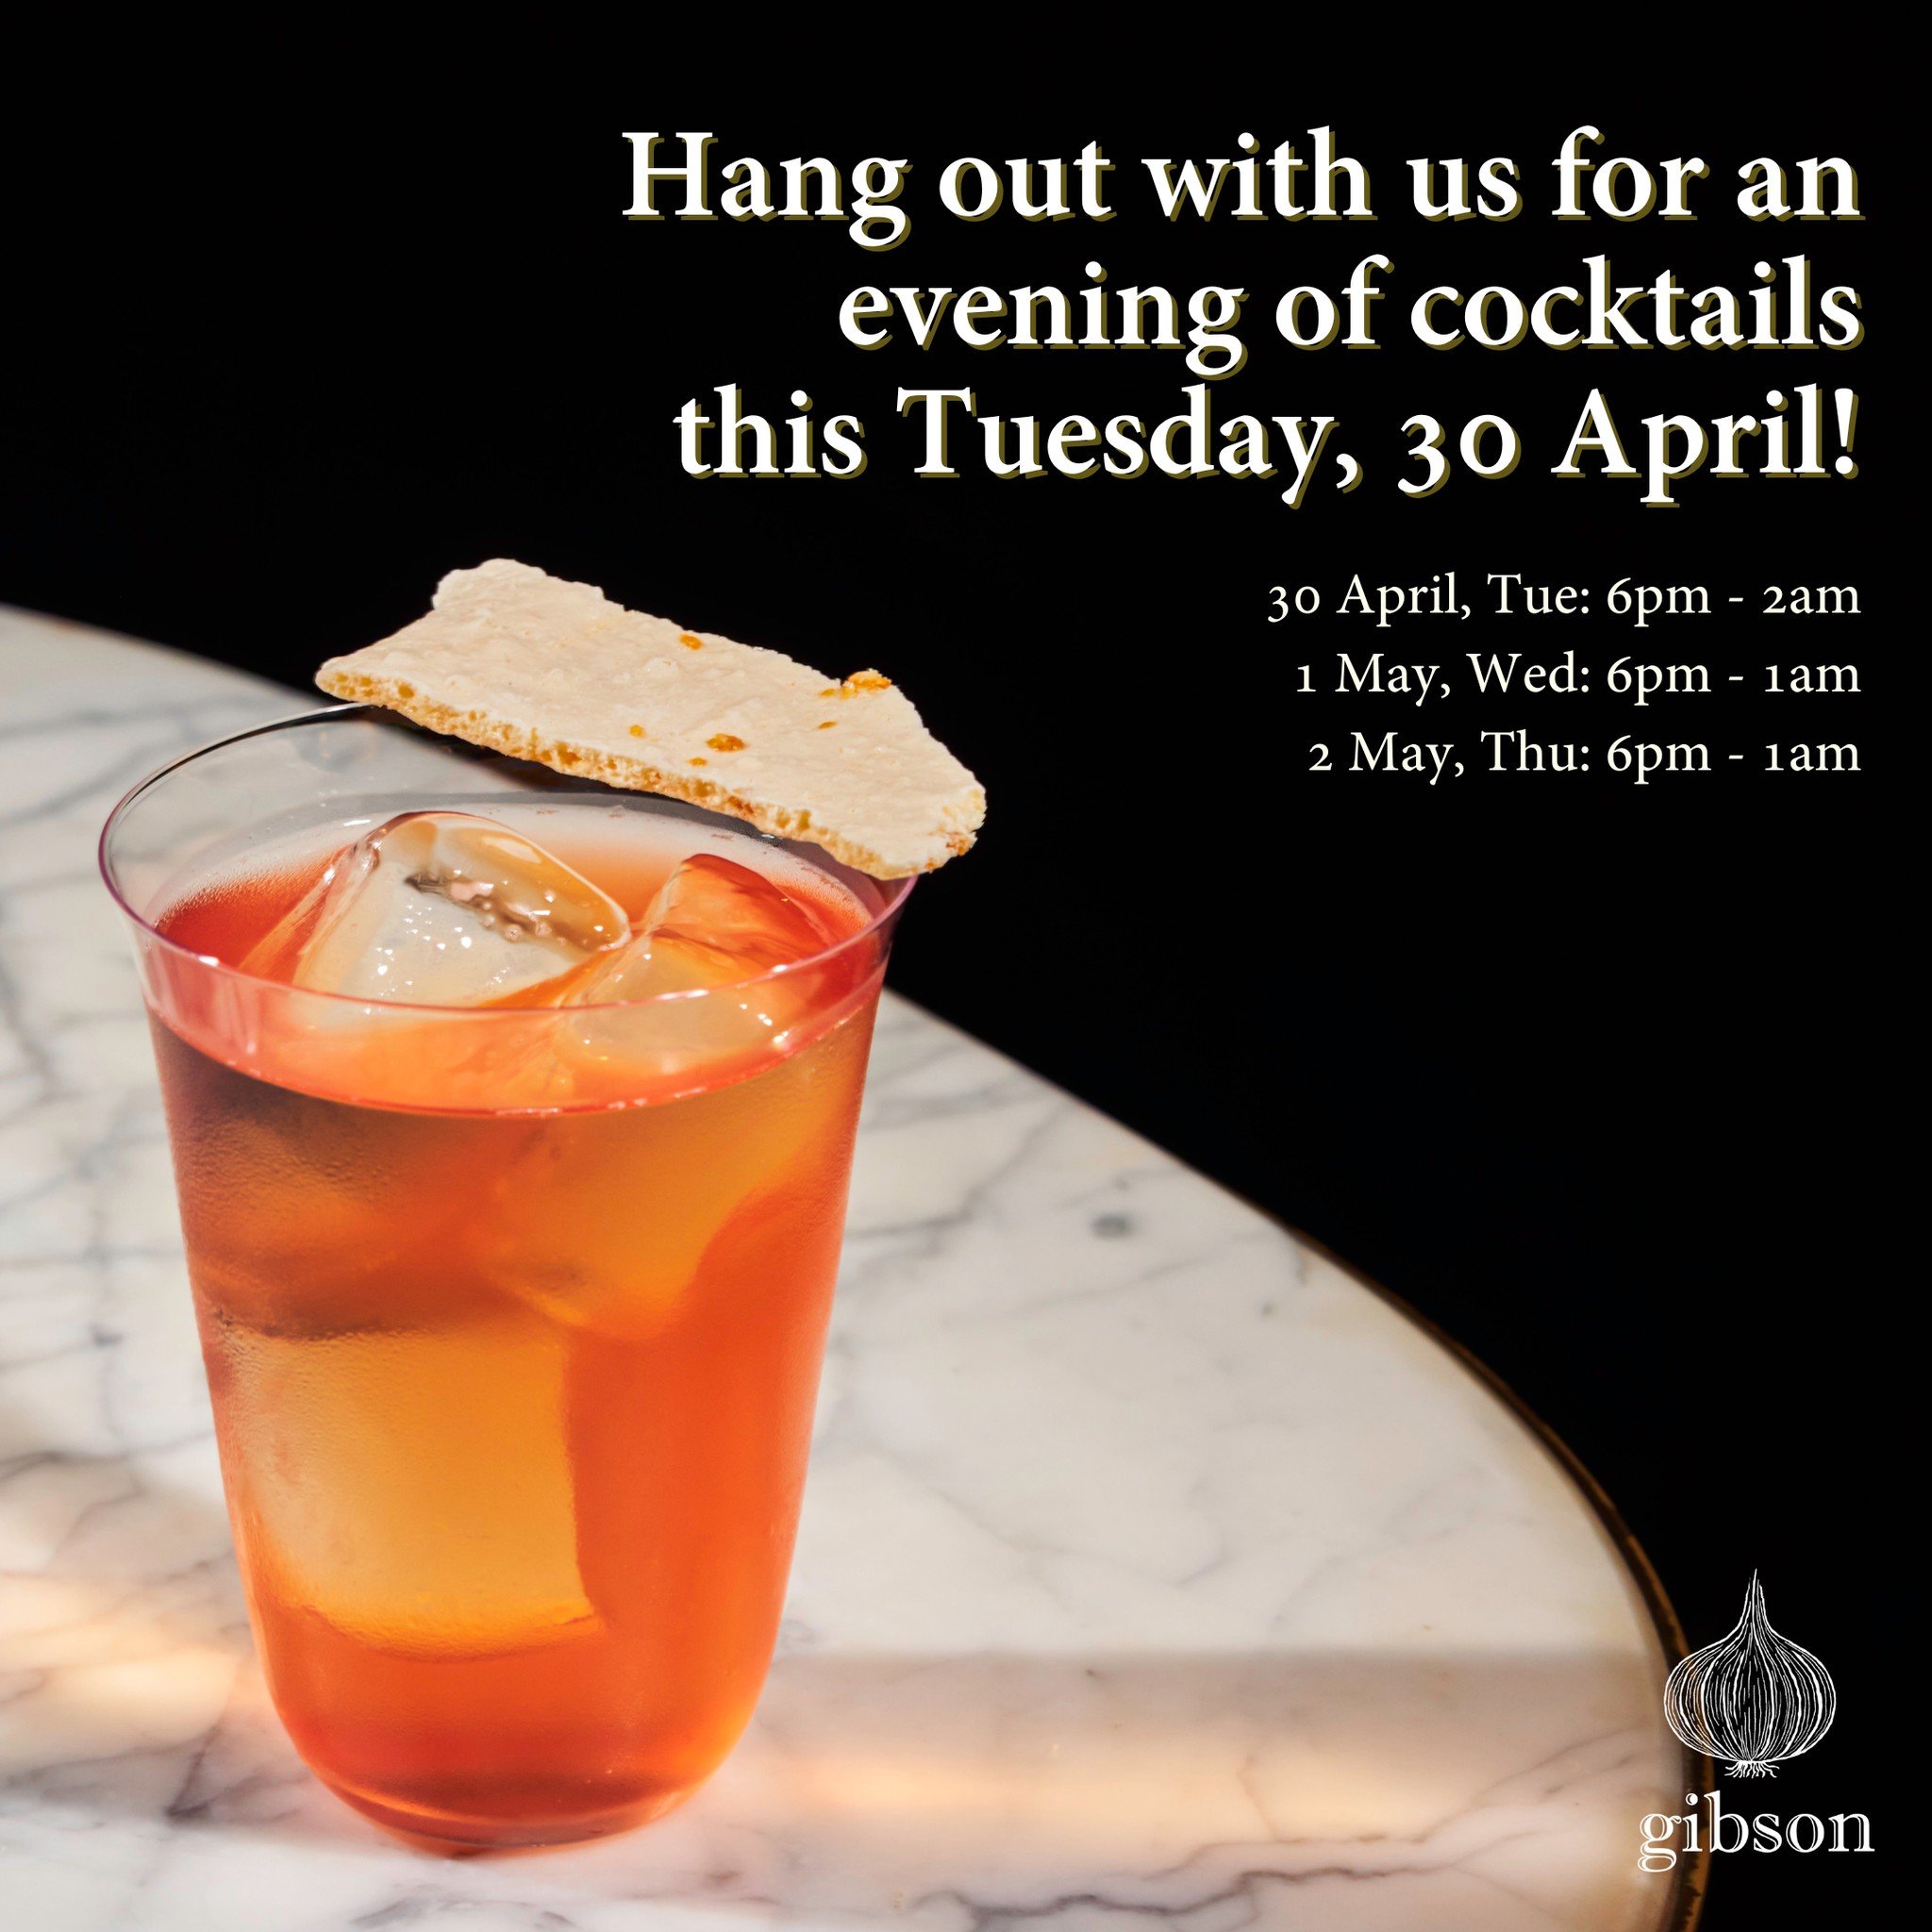 Come hang out with us next Tuesday, 30 April and try our new menu, Cocktail Supermarket!

For a delicious prelude to the Labour Day public holiday, Gibson will remain open on Tuesday till 2am for some tasty tipples during this midweek break.

Book yo